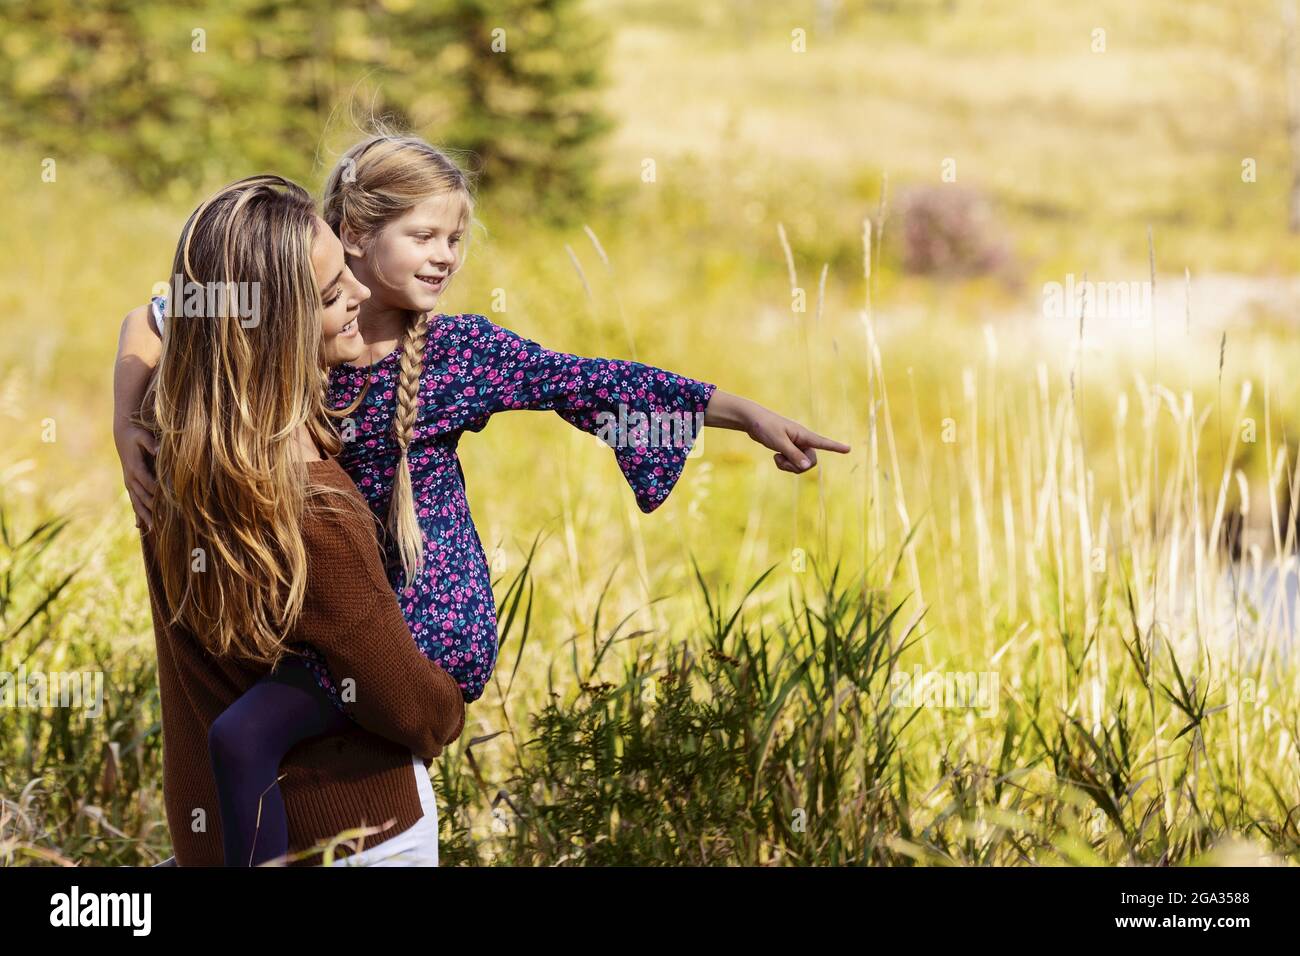 A mother spending quality time outdoors with her daughter in a city park; Edmonton, Alberta, Canada Stock Photo